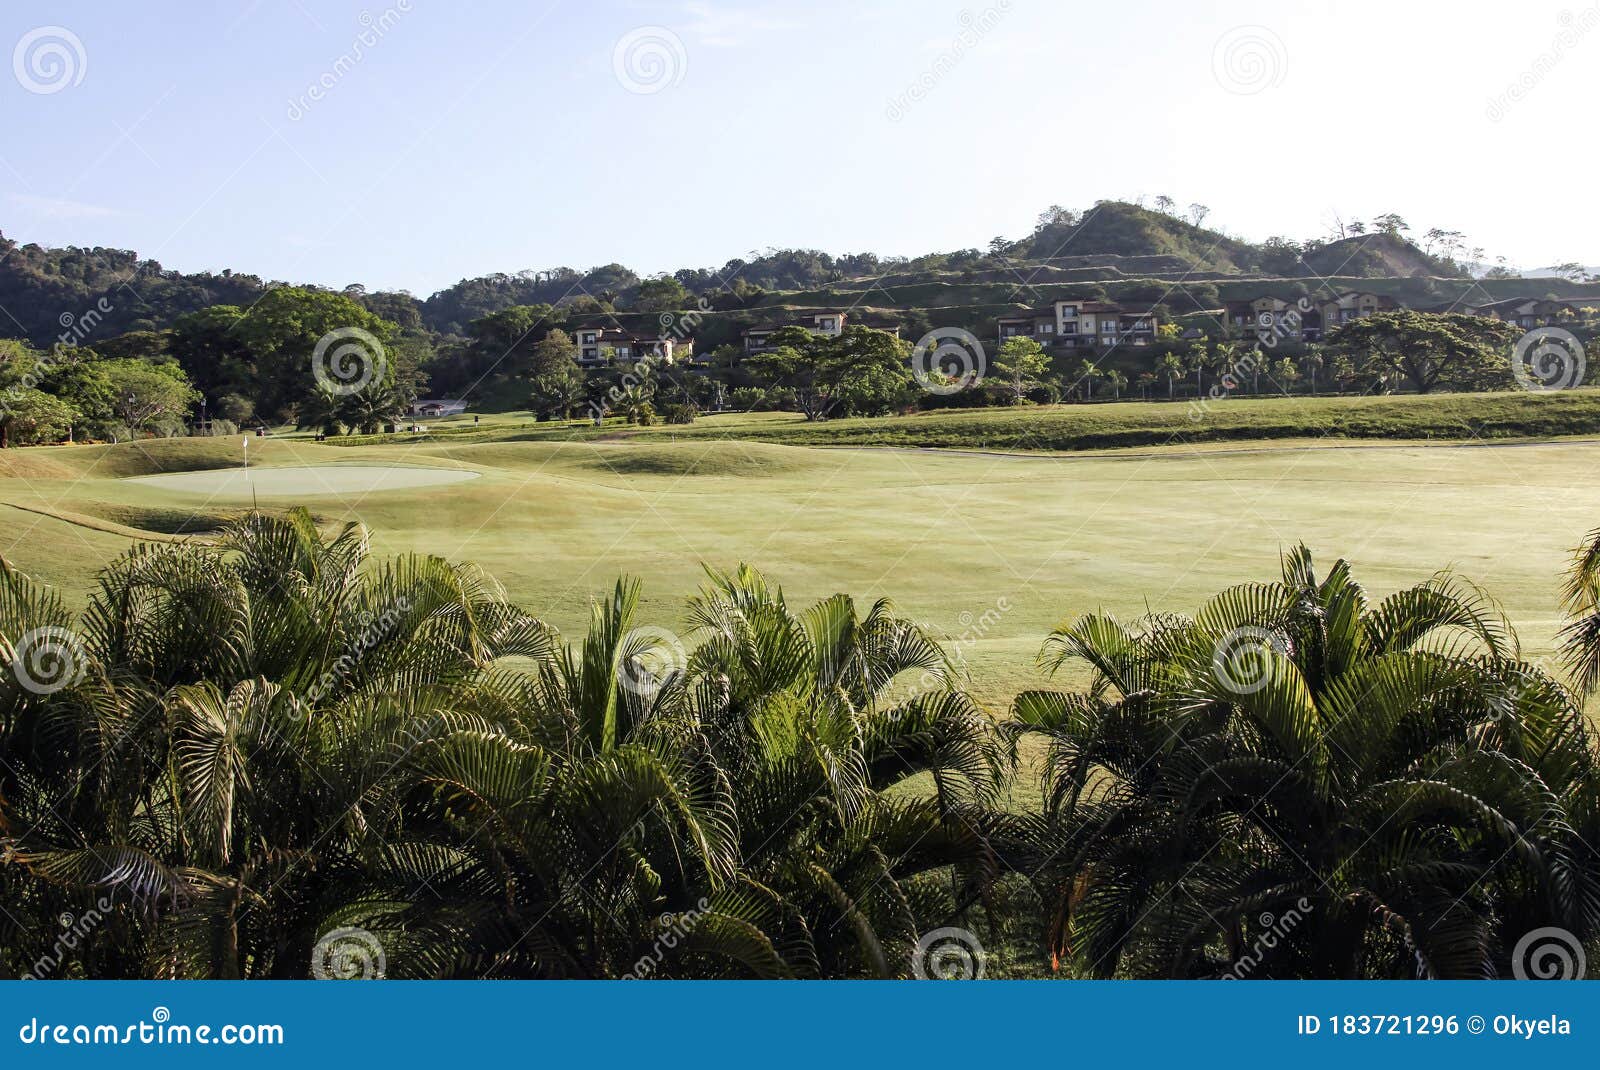 view of the landscape and vegetation of the settlement of los suenos